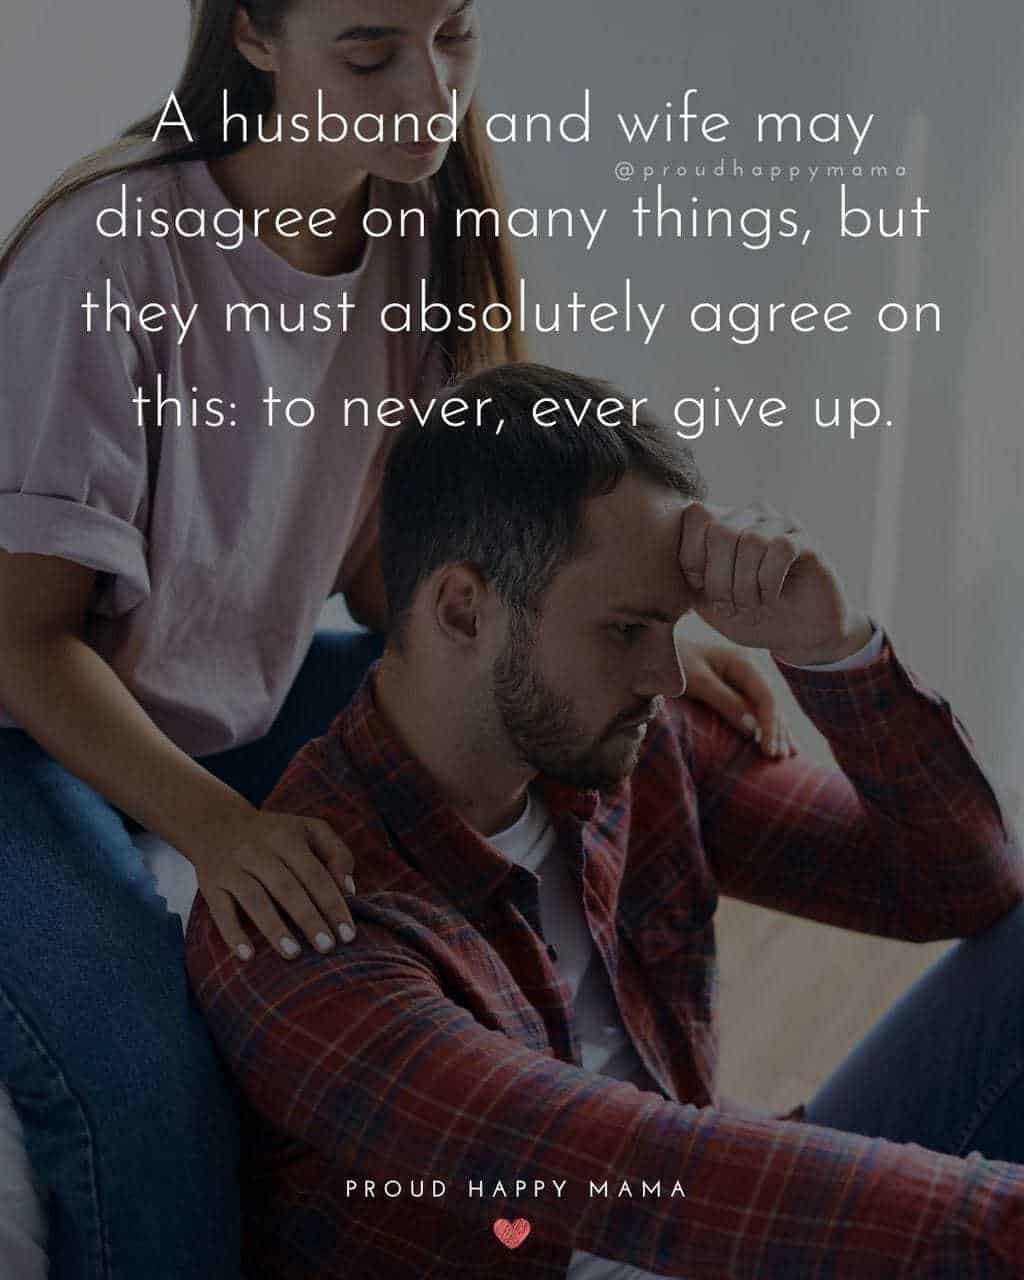 Husband and Wife Quotes - A husband and wife may disagree on many things, but they must absolutely agree on this to never, ever give up.